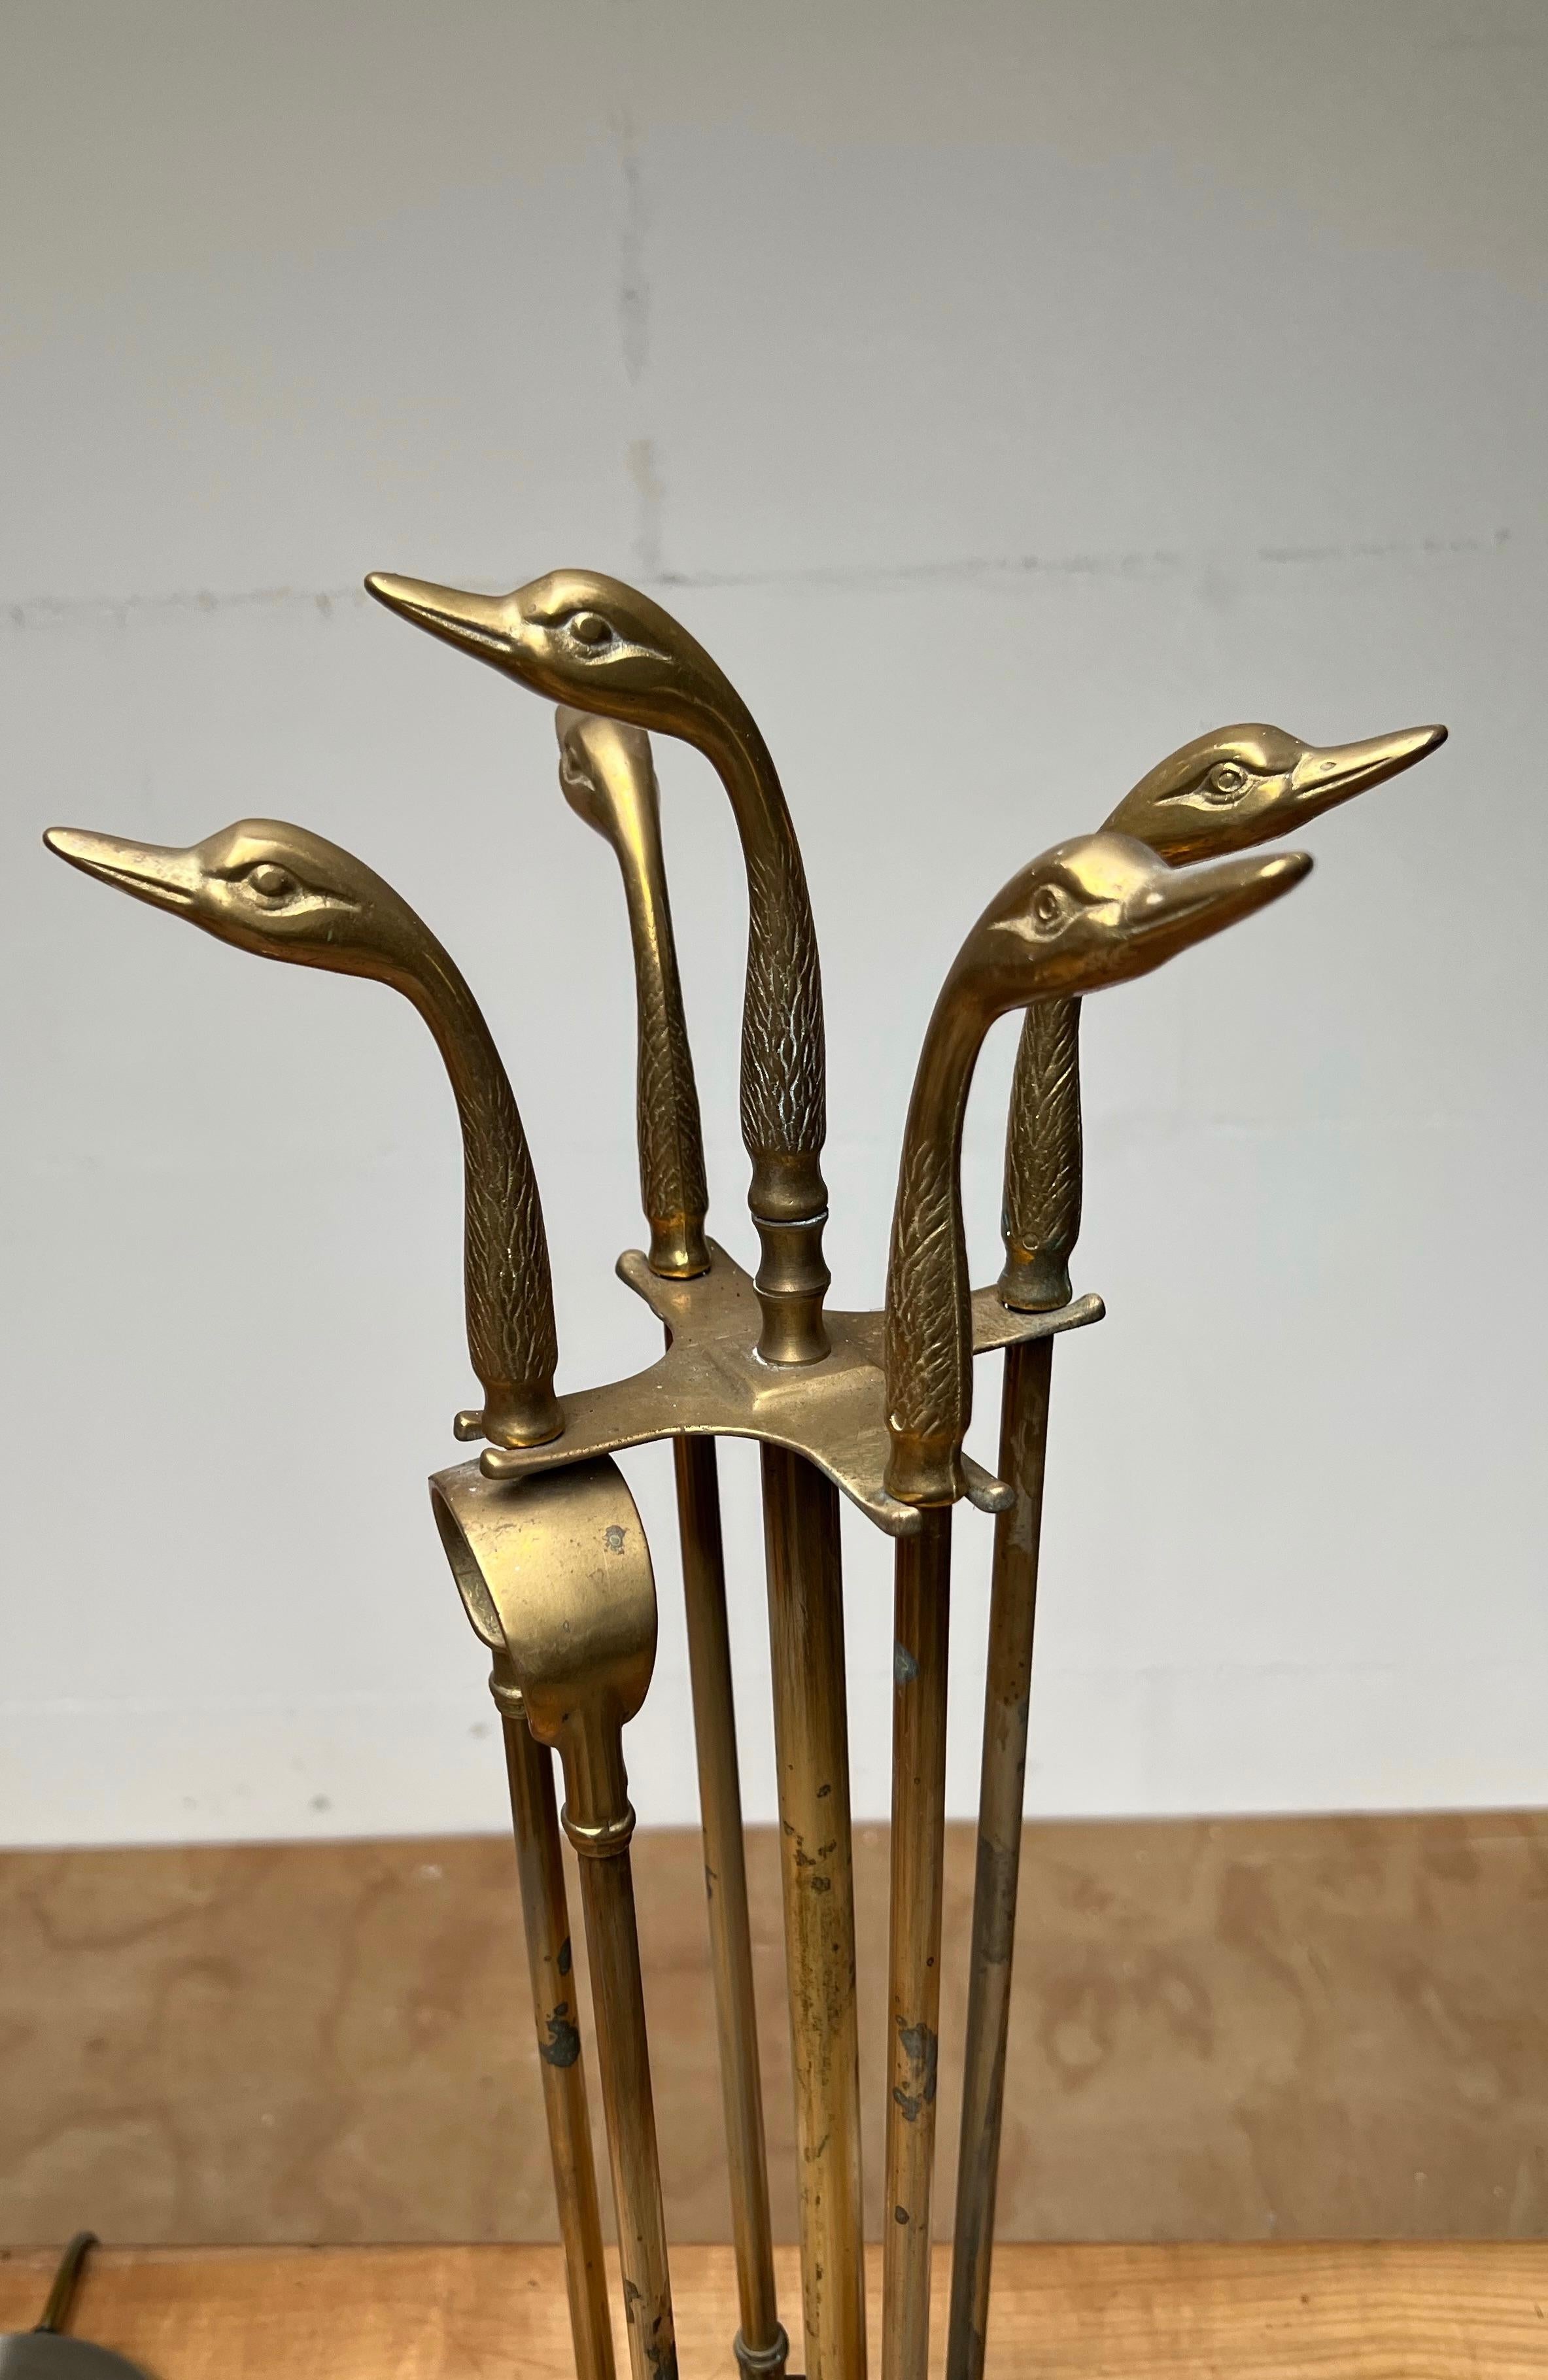 This decorative and practical to use, solid bronze fire set will help manage the fire in your fireplace.

If you are passionate about artistic and handcrafted pieces in general and about ducks or swans in particular then this fireplace set from